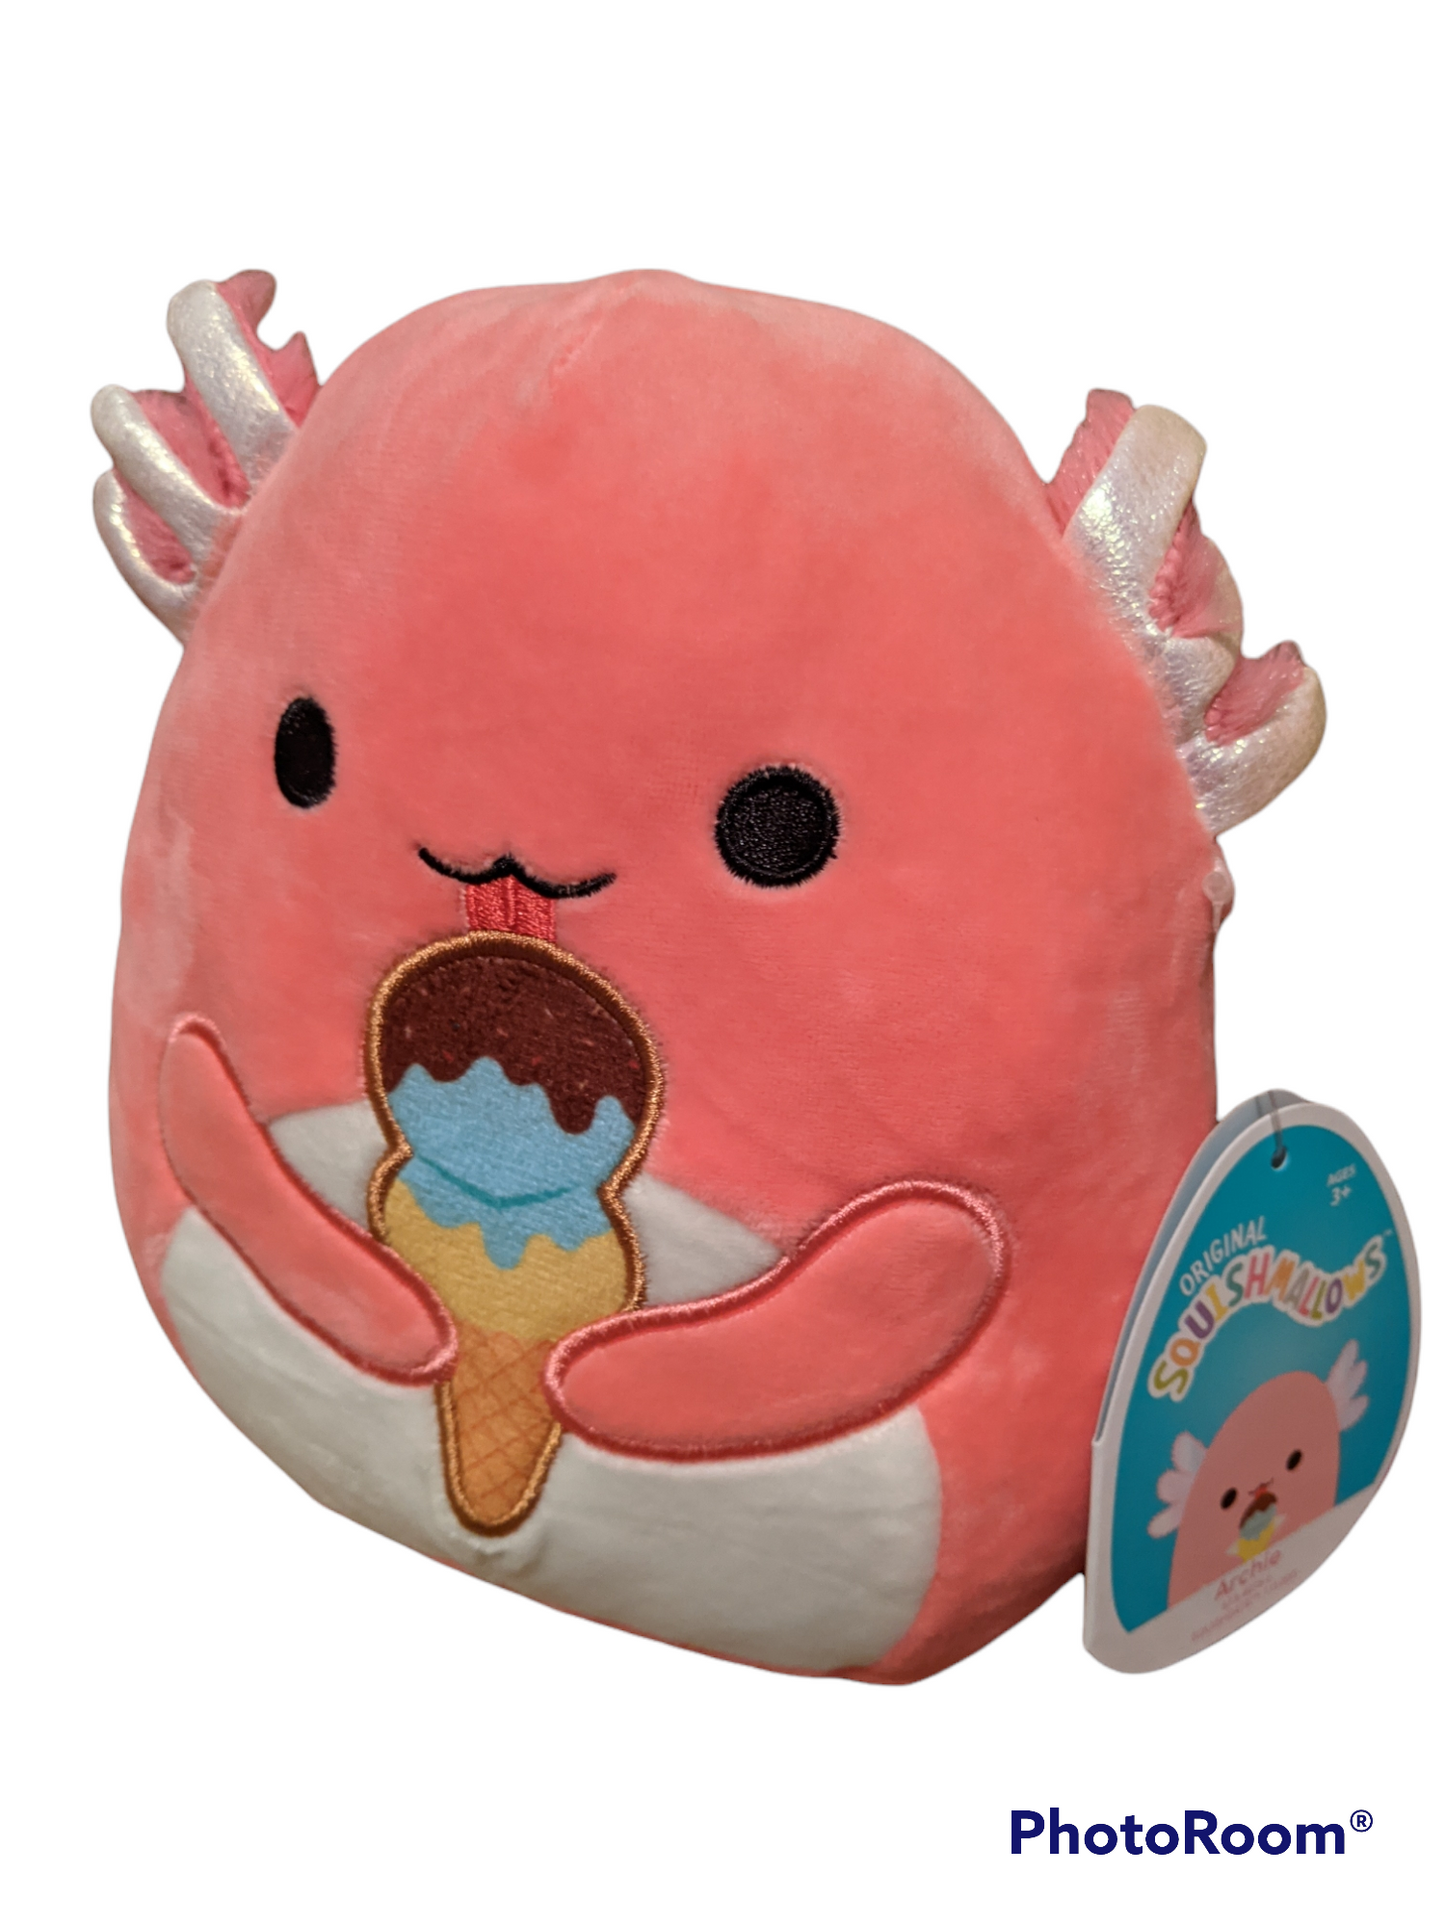 Squishmallows Archie the Axolotl with Ice Cream Cone Foodie Squad 7.5" Plush Stuffed Animal